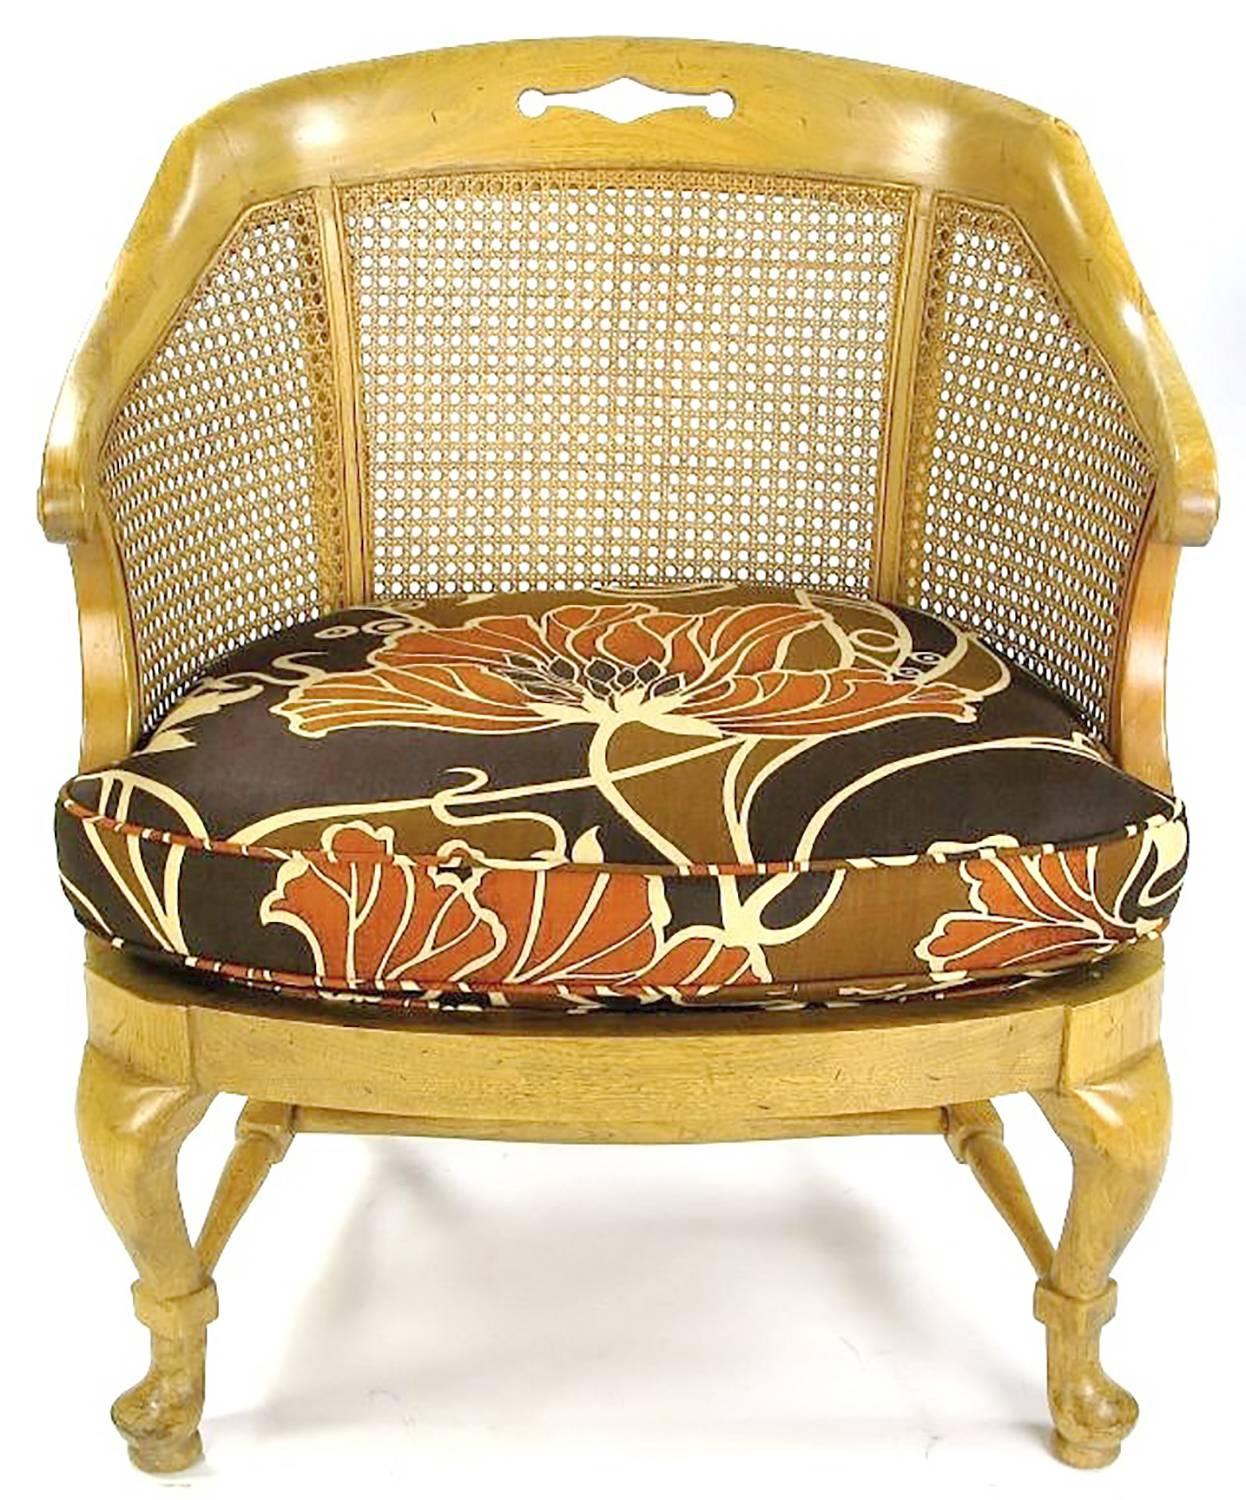 Bleached mahogany cabriole leg Regency style bergere armchairs with woven cane back and sides. Cross stretcher base with rectangular box joinery. New large print vintage fabric. $3,250.